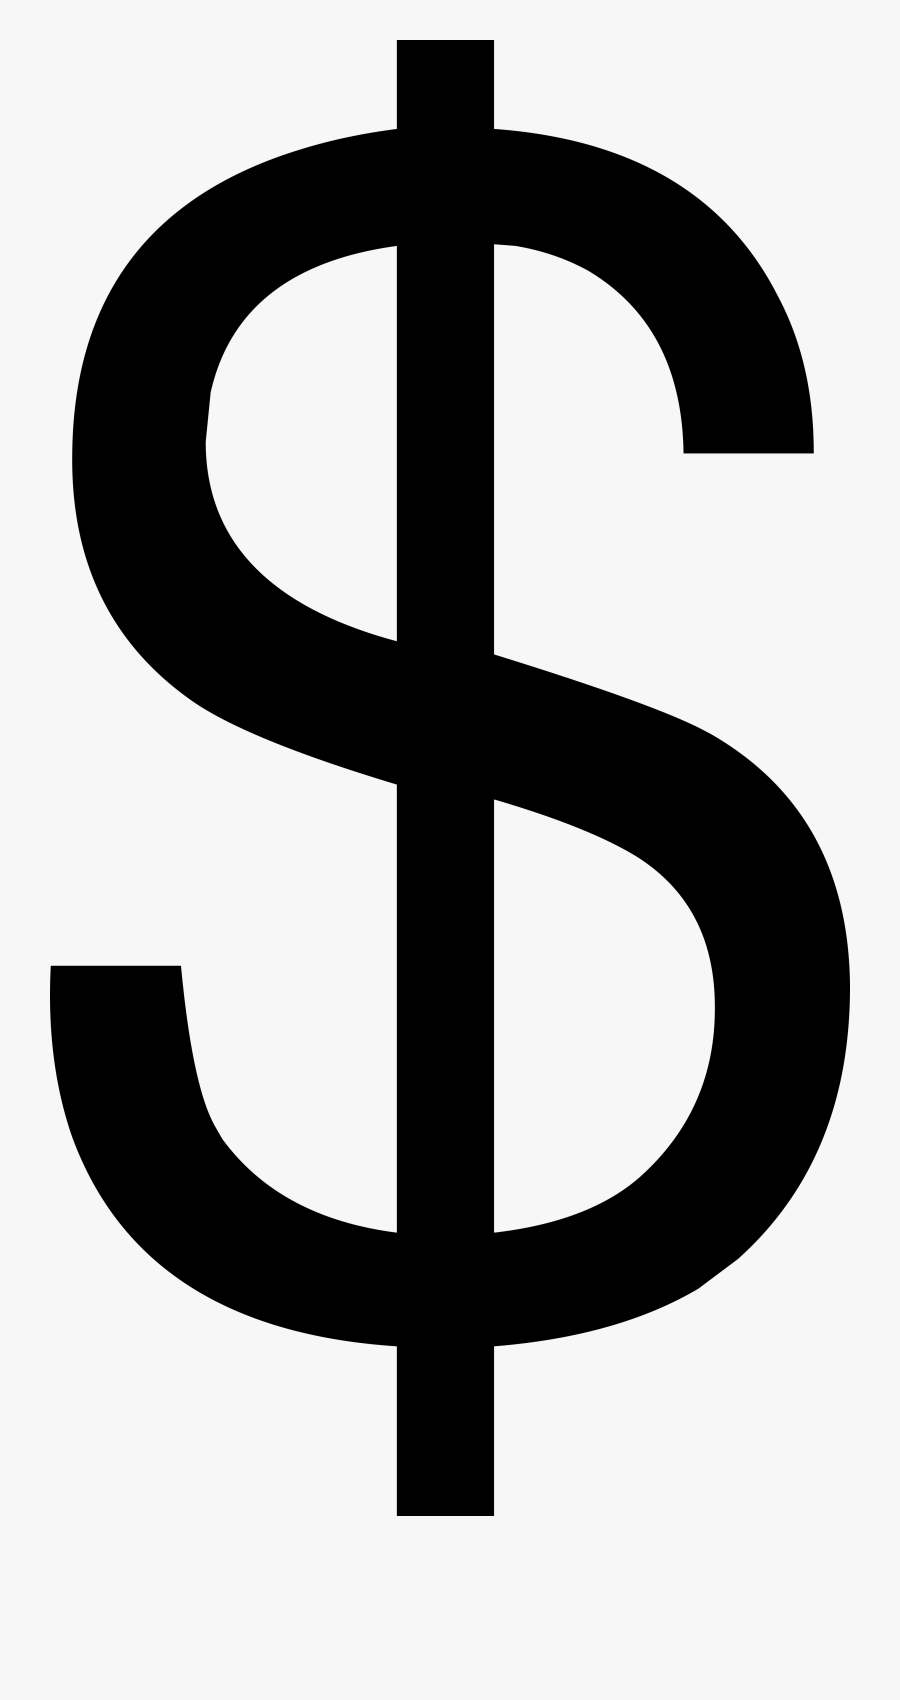 Signs And Symbols Local - Us Dollar Sign Png, Transparent Clipart